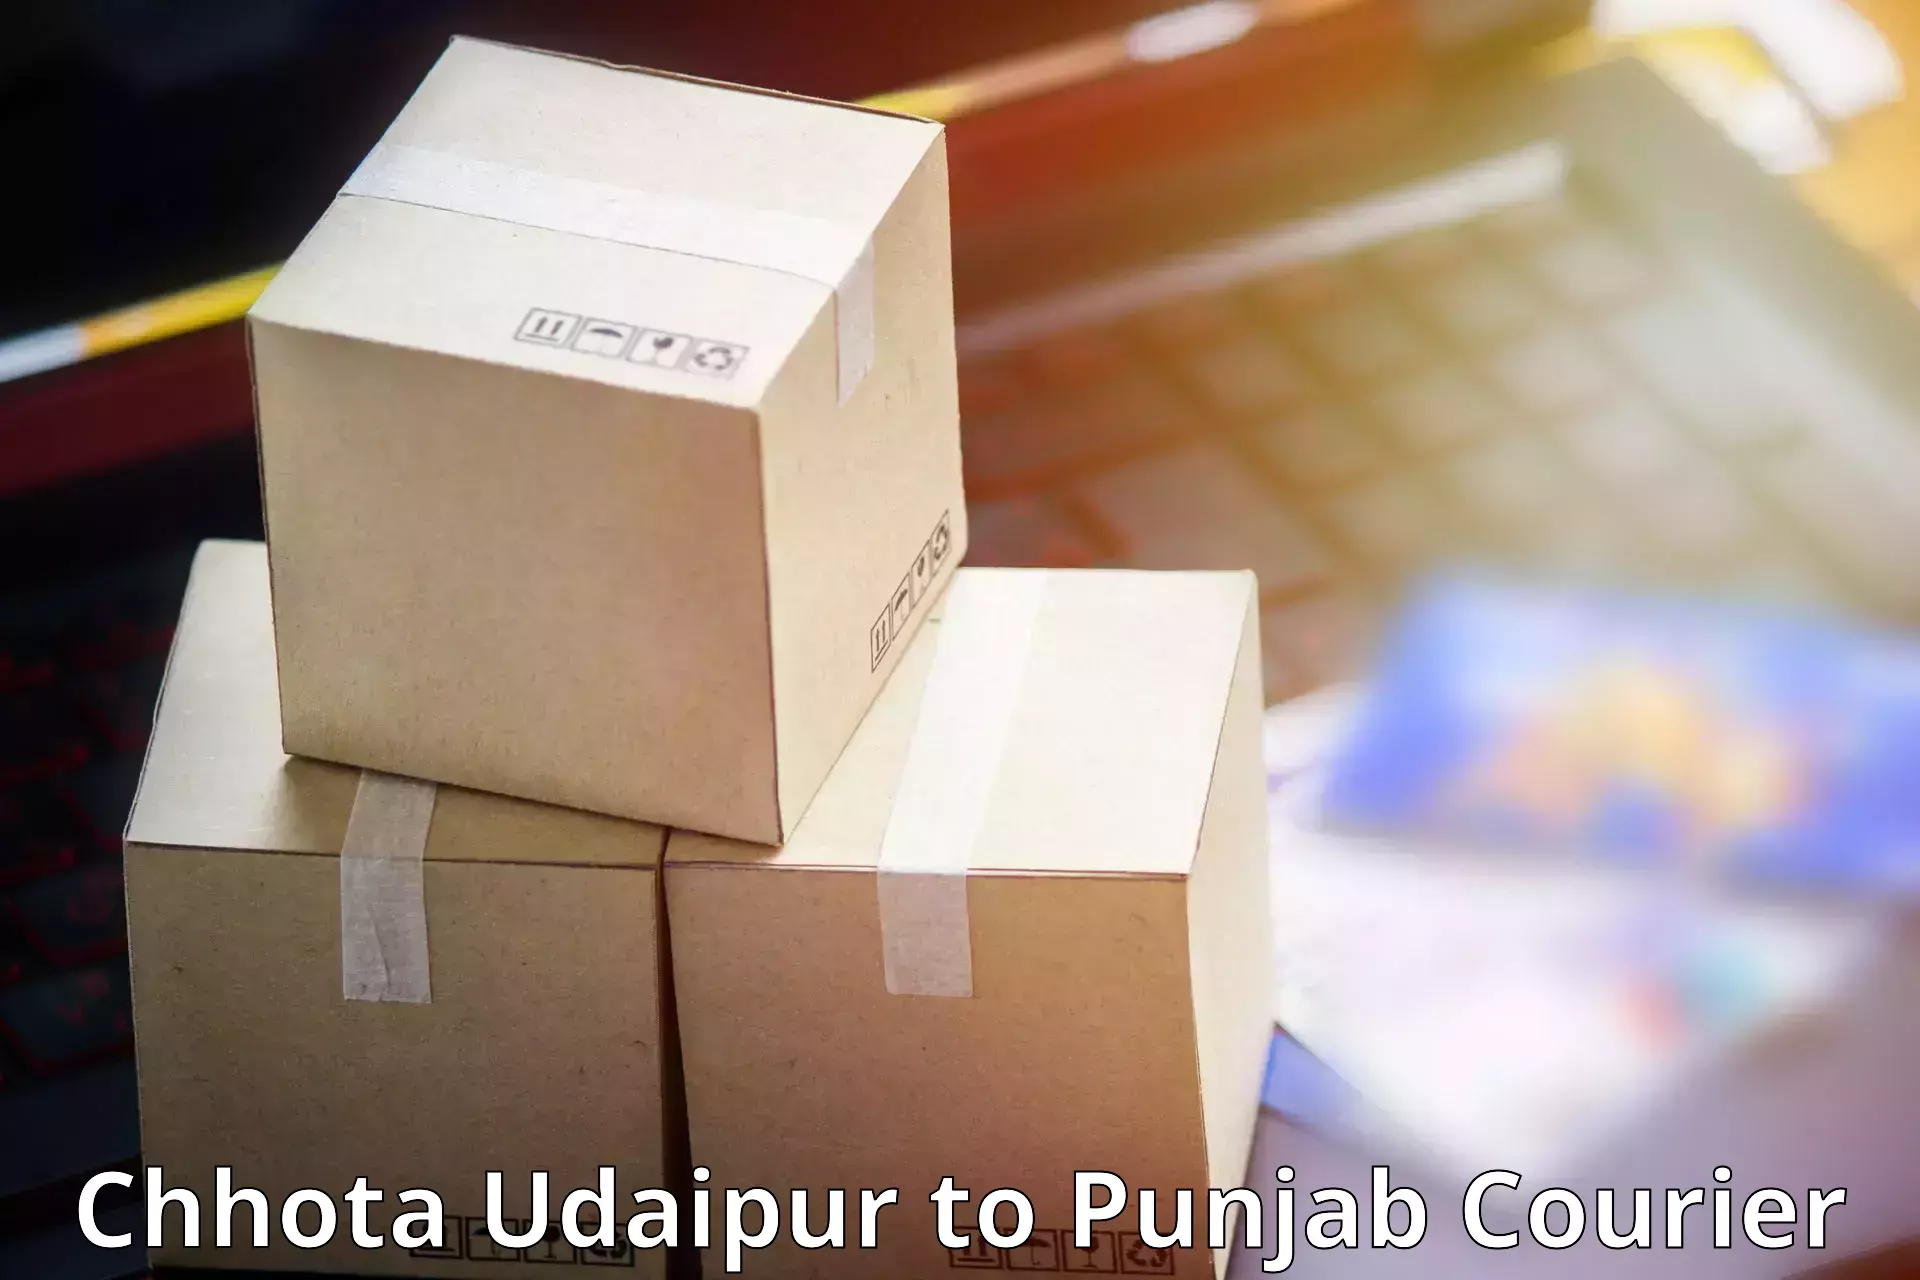 Flexible delivery schedules Chhota Udaipur to Ajnala